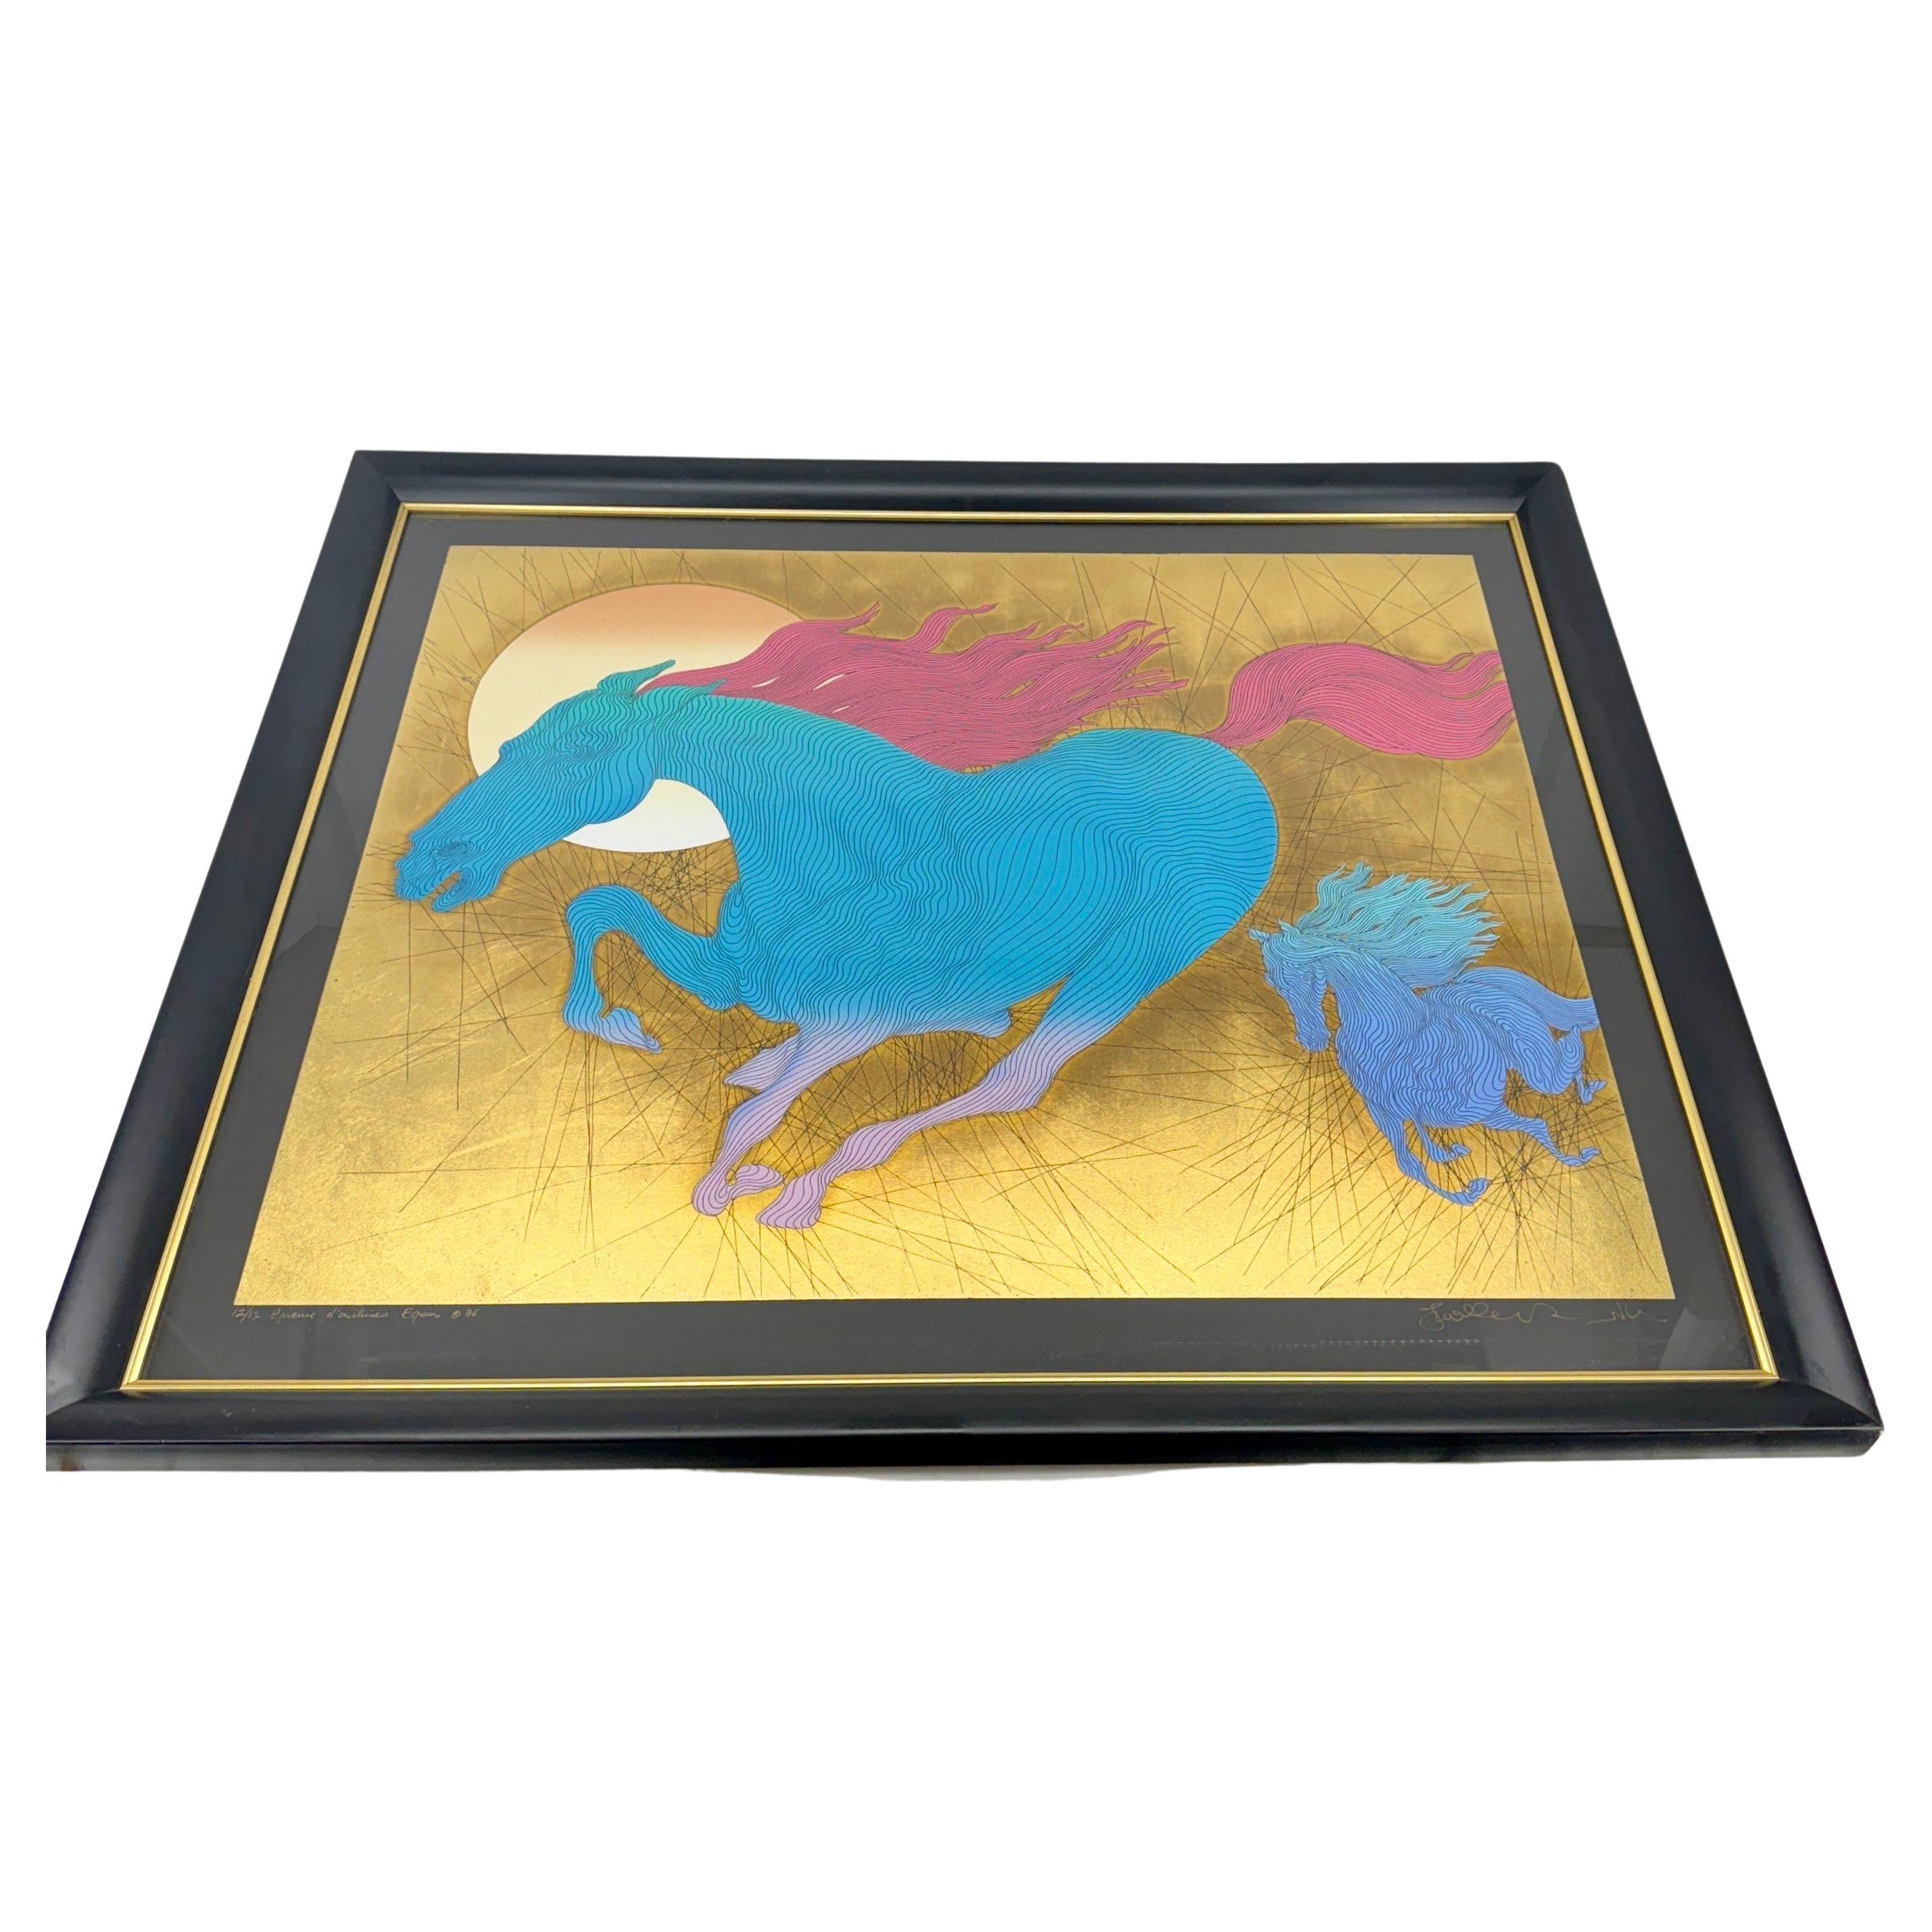 Equus Limited Edition Framed Blue Horse Print Serigraph by Guillaume Azoulay, France 2006

Large gold leaf Equestrian focused serigraph by artist Guillaume Azoulay, titled 